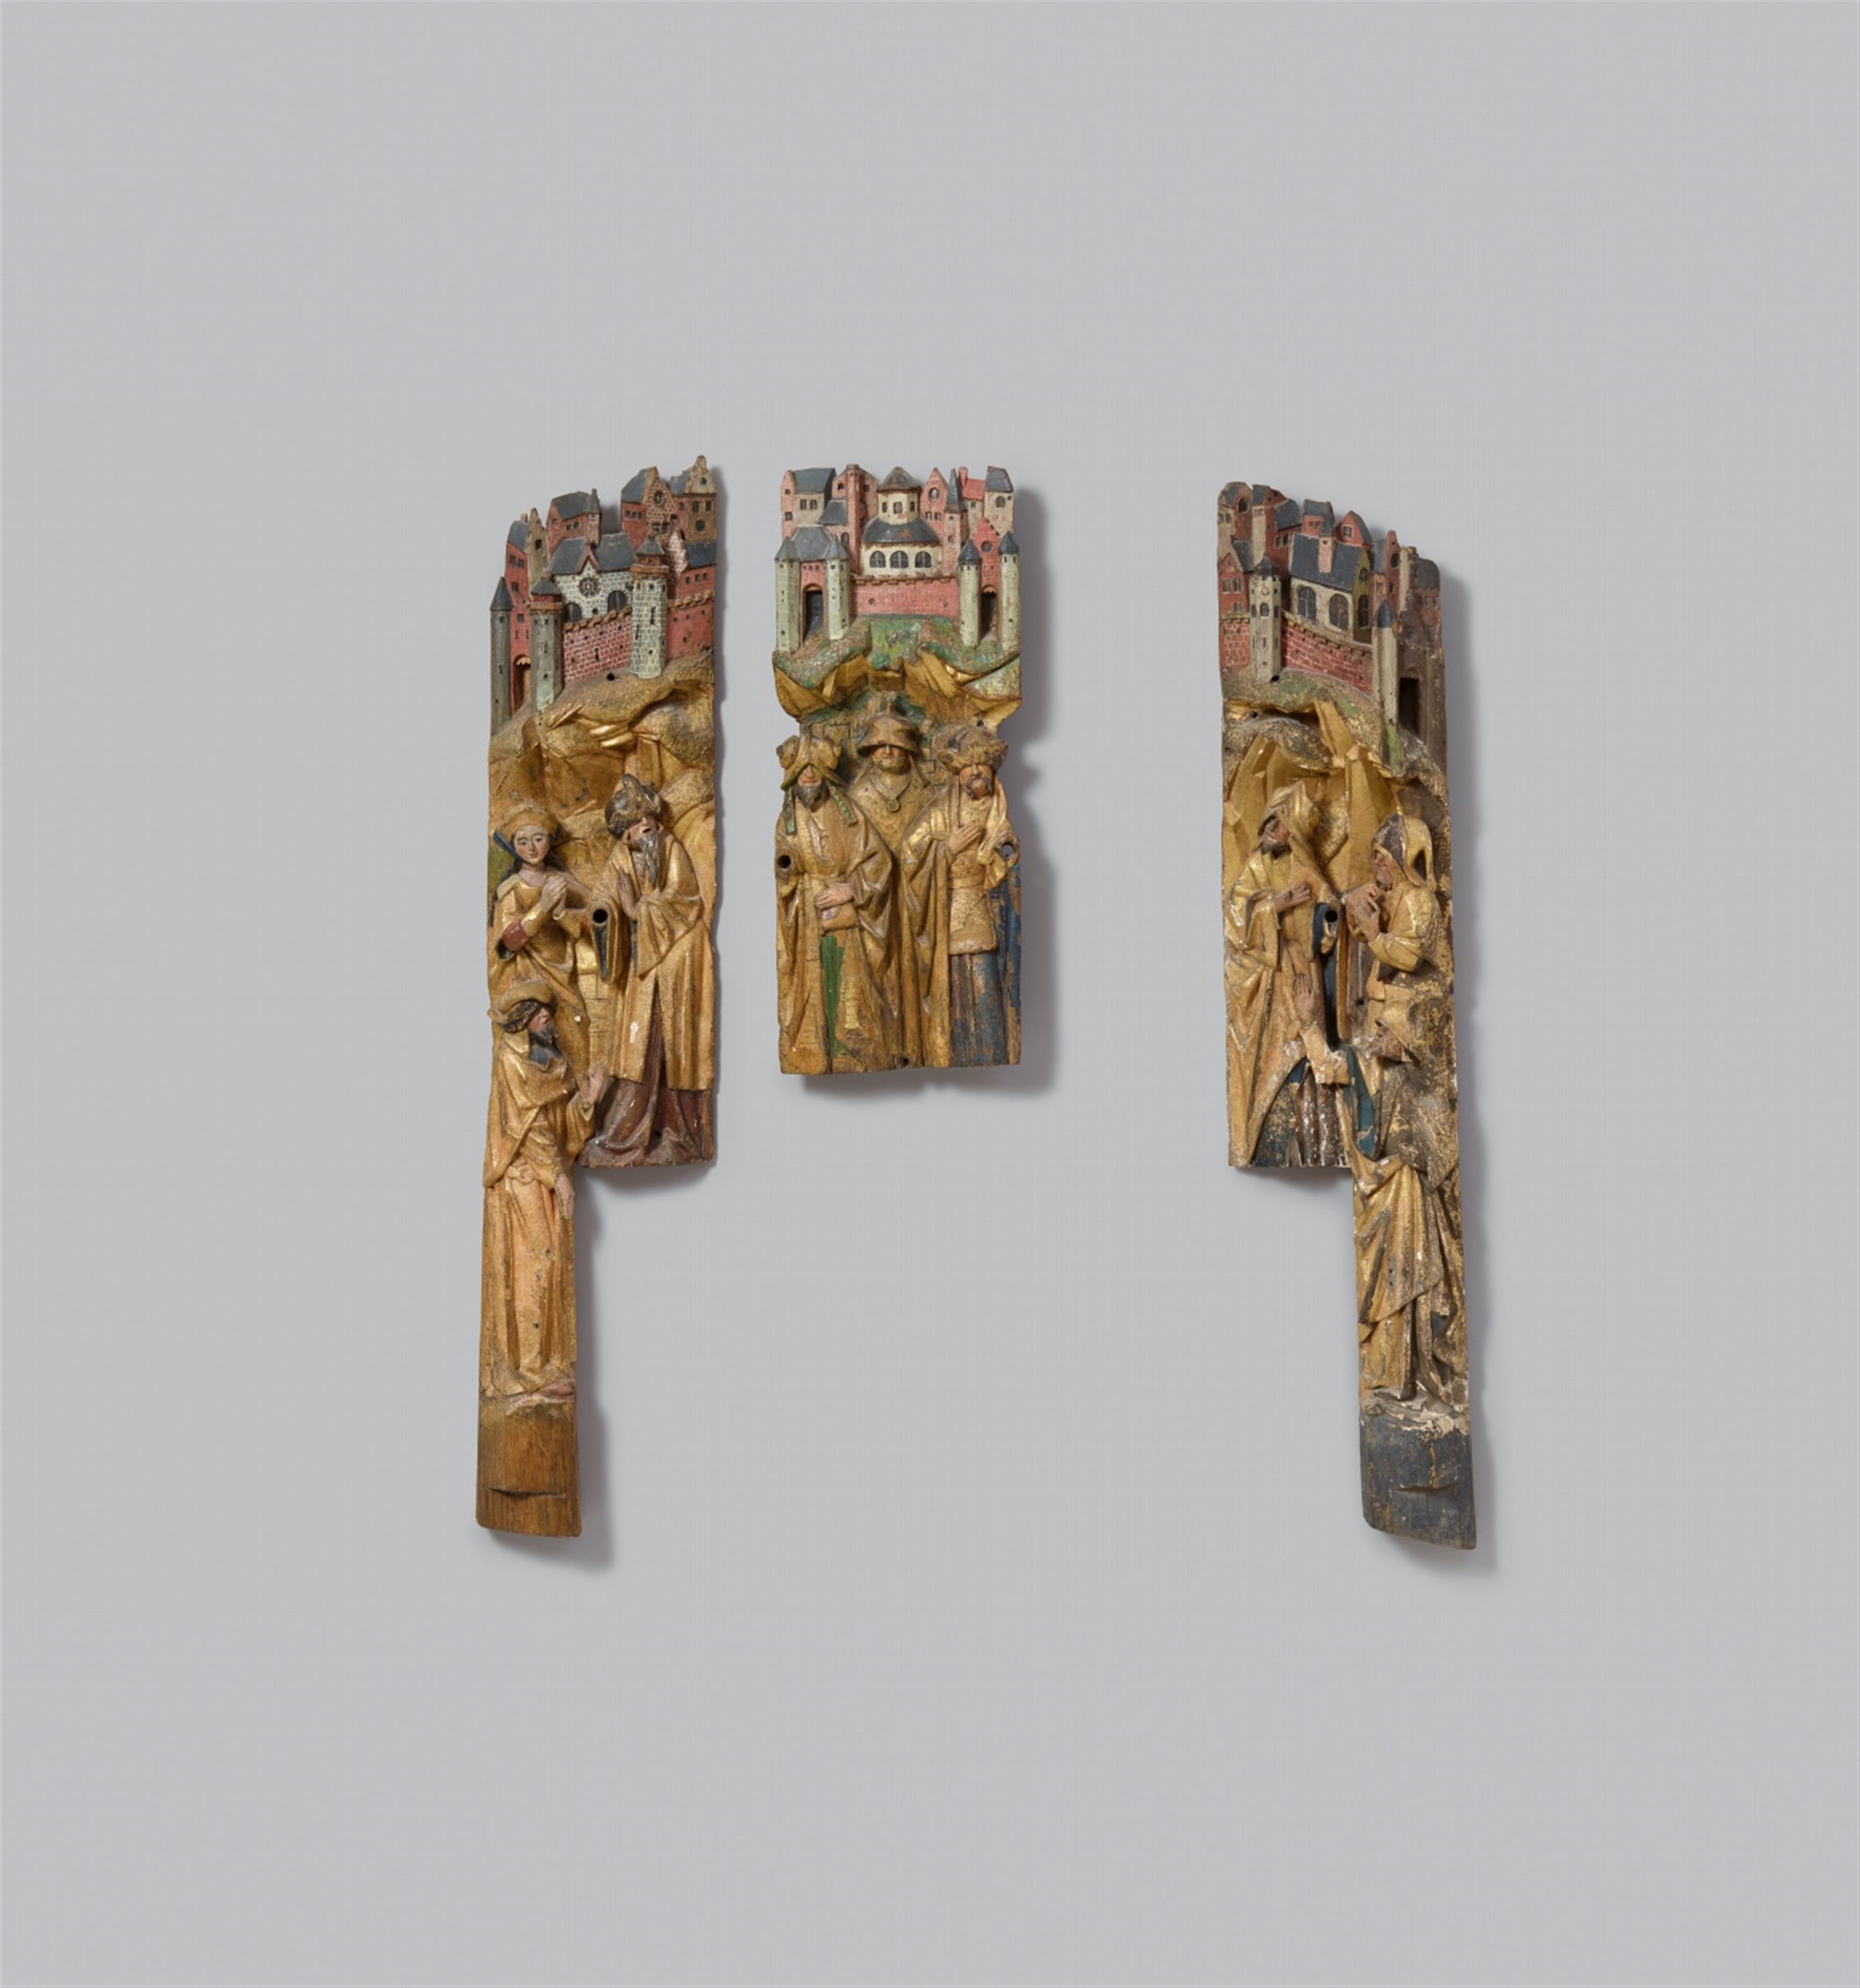 Probably Antwerp circa 1520/1530 - Three reliefs from a Crucifixion scene, probably Antwerp, circa 1520/1530 - image-1